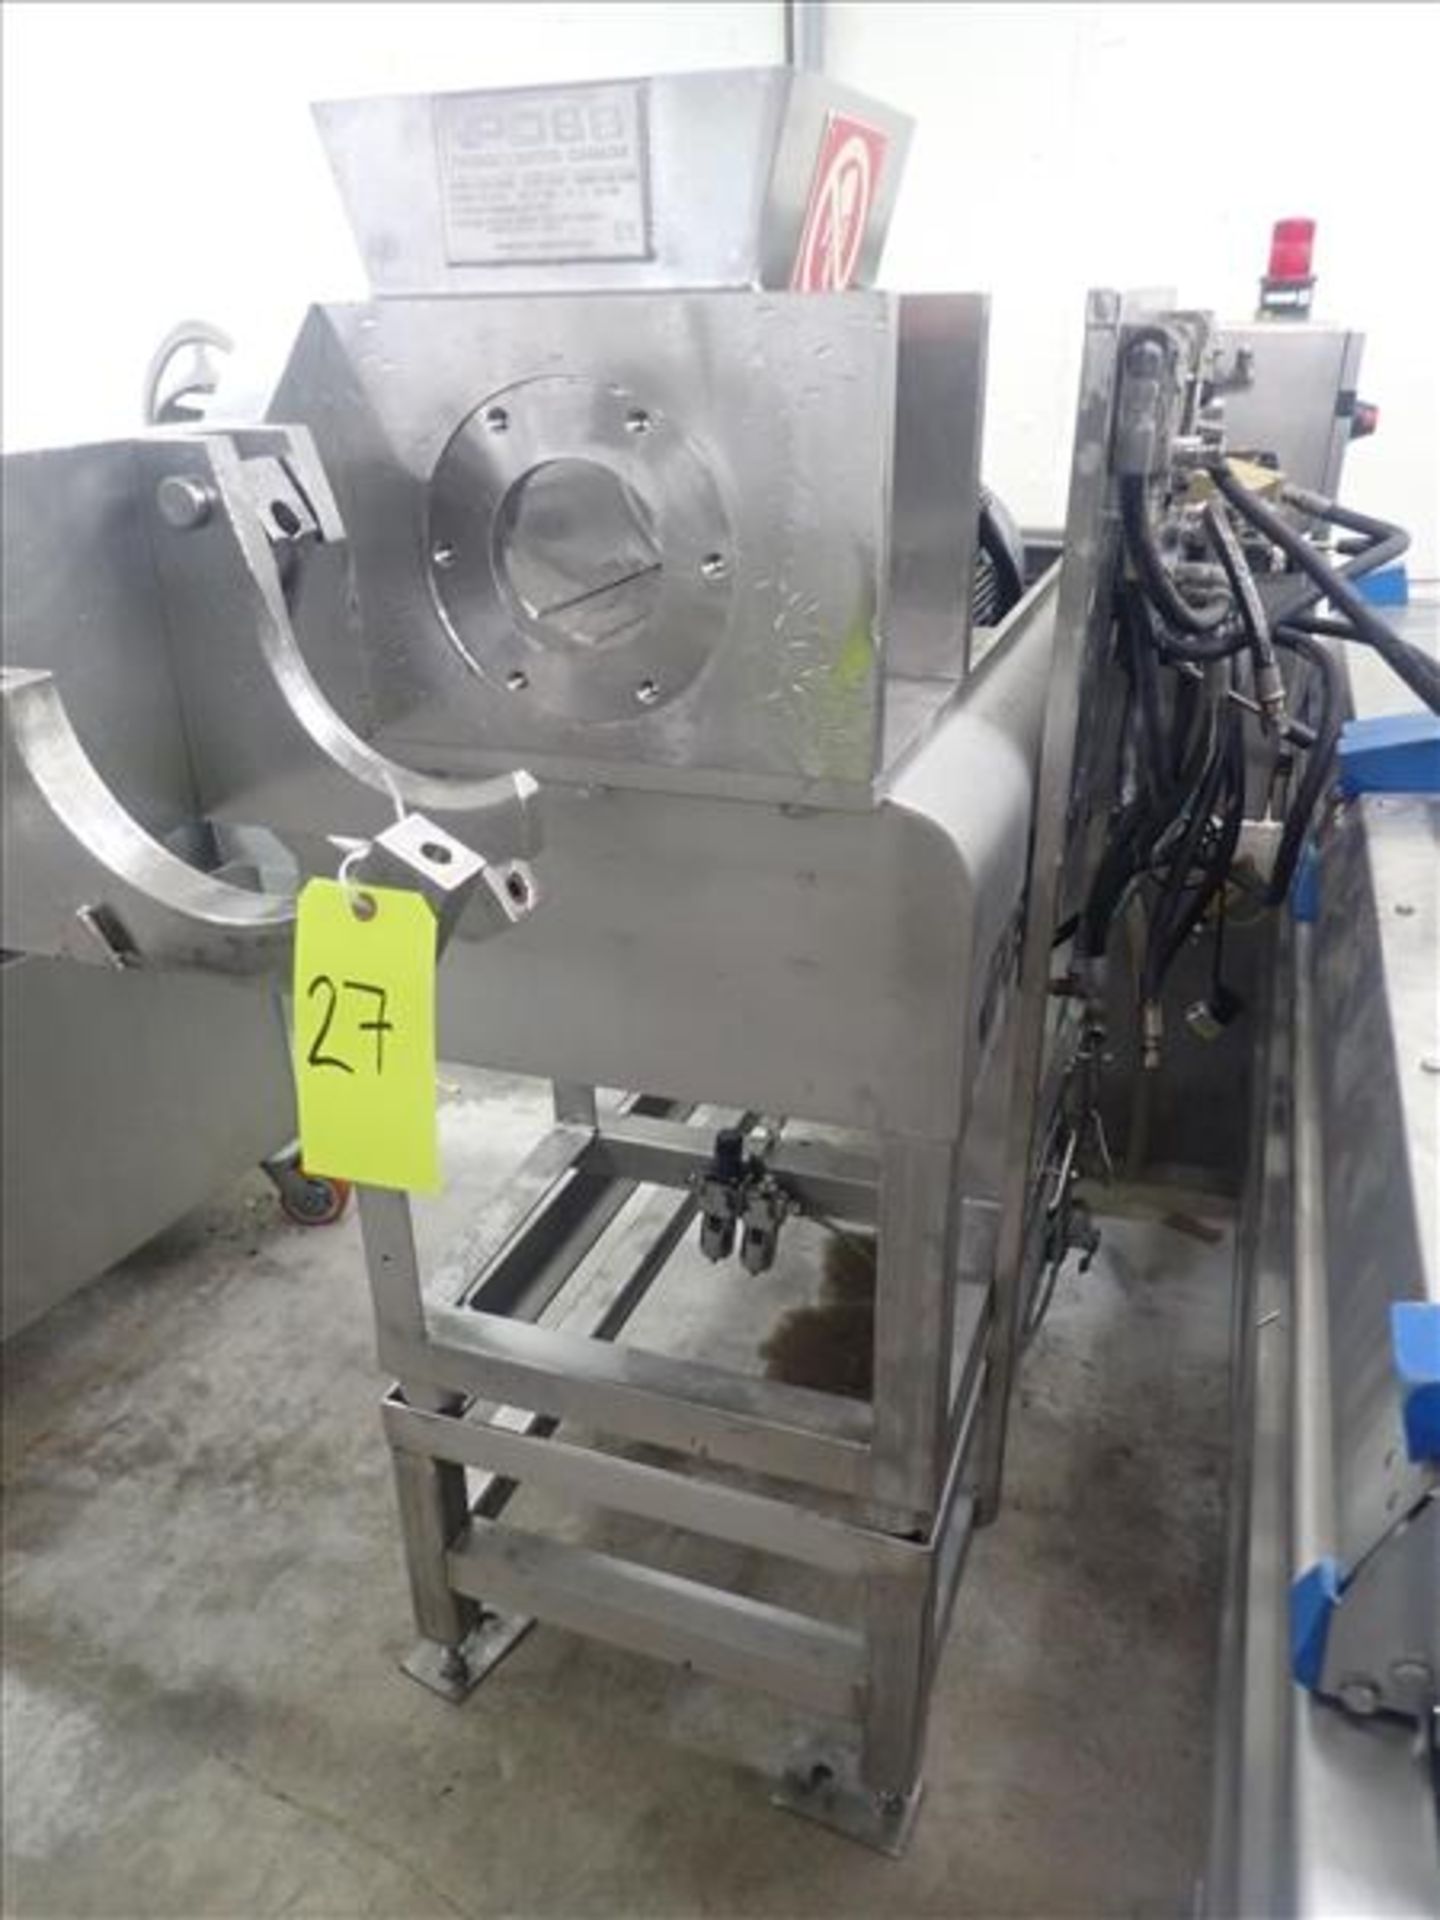 Poss meat grinder/seperator, mod. PDE 1500E, ser. no. 1485, 25 hp, stainless steel, c/w spare - Image 2 of 12